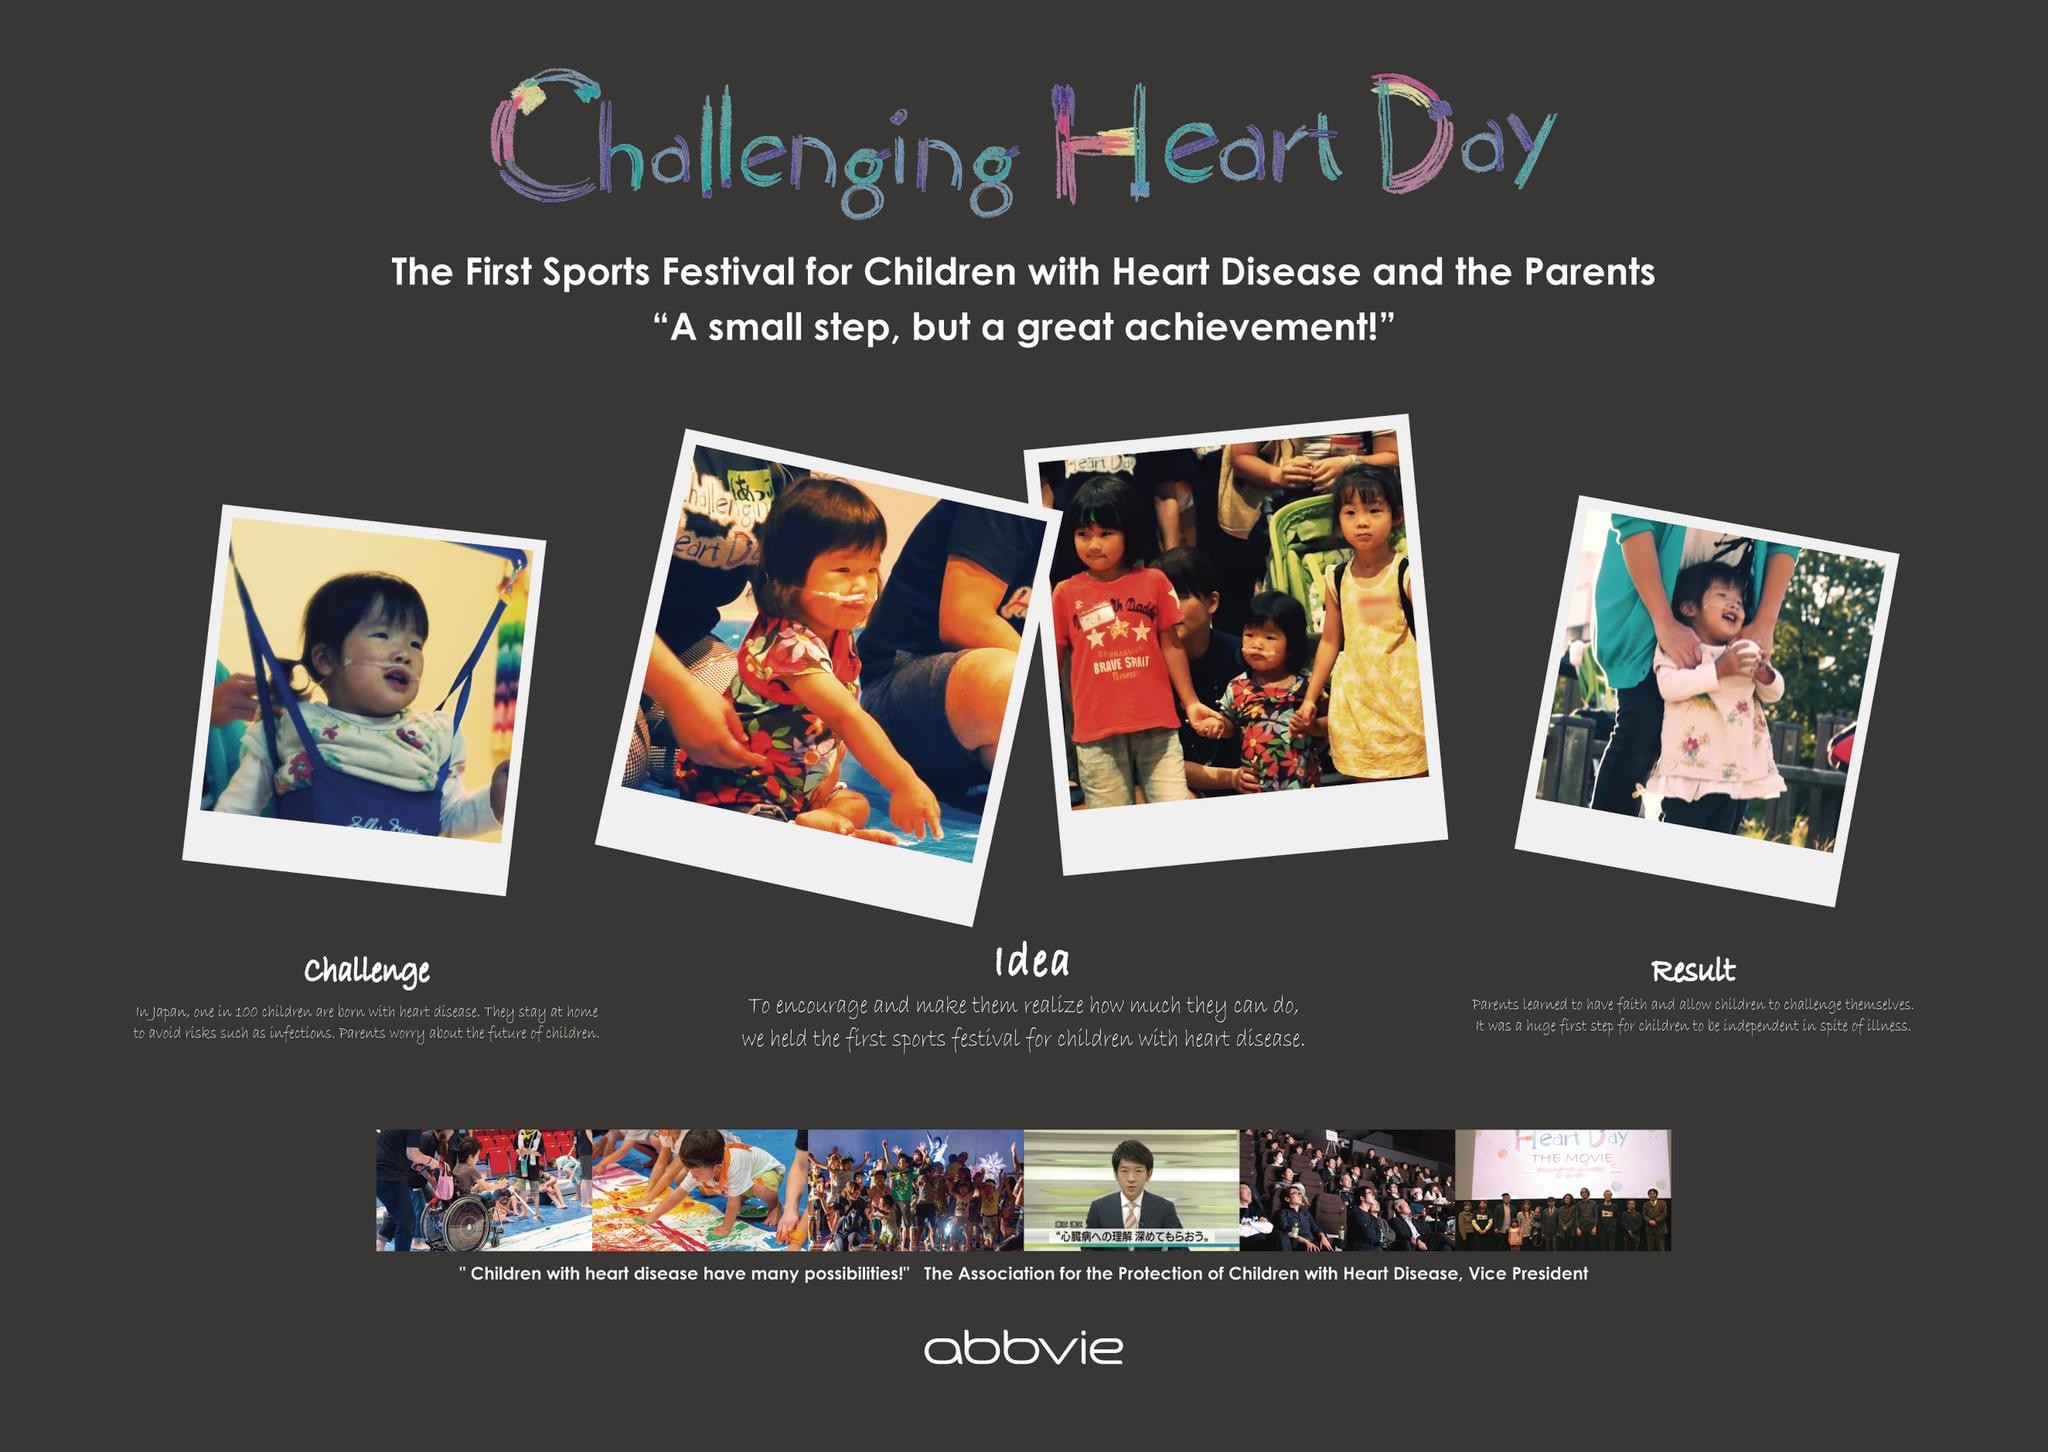 Challenging Heart Day